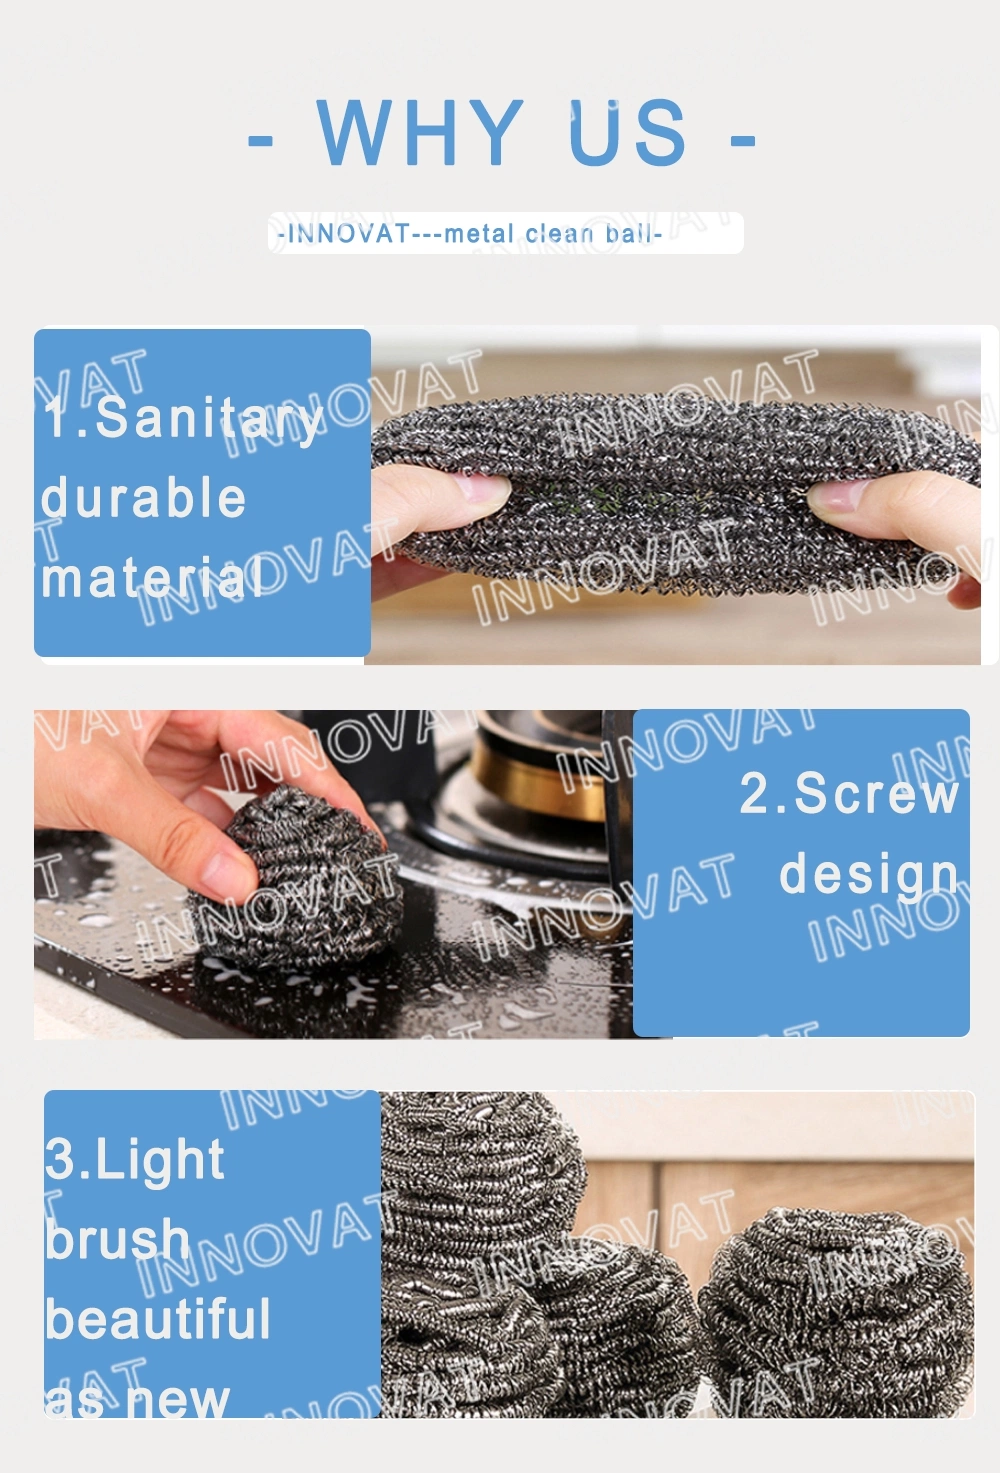 Metal Cleaningmetal Cleaning Ball/Scourer Very Resistant and Durable Stainless/Galvanized/Copper Kitchen Stainless Dish Wash Scourer